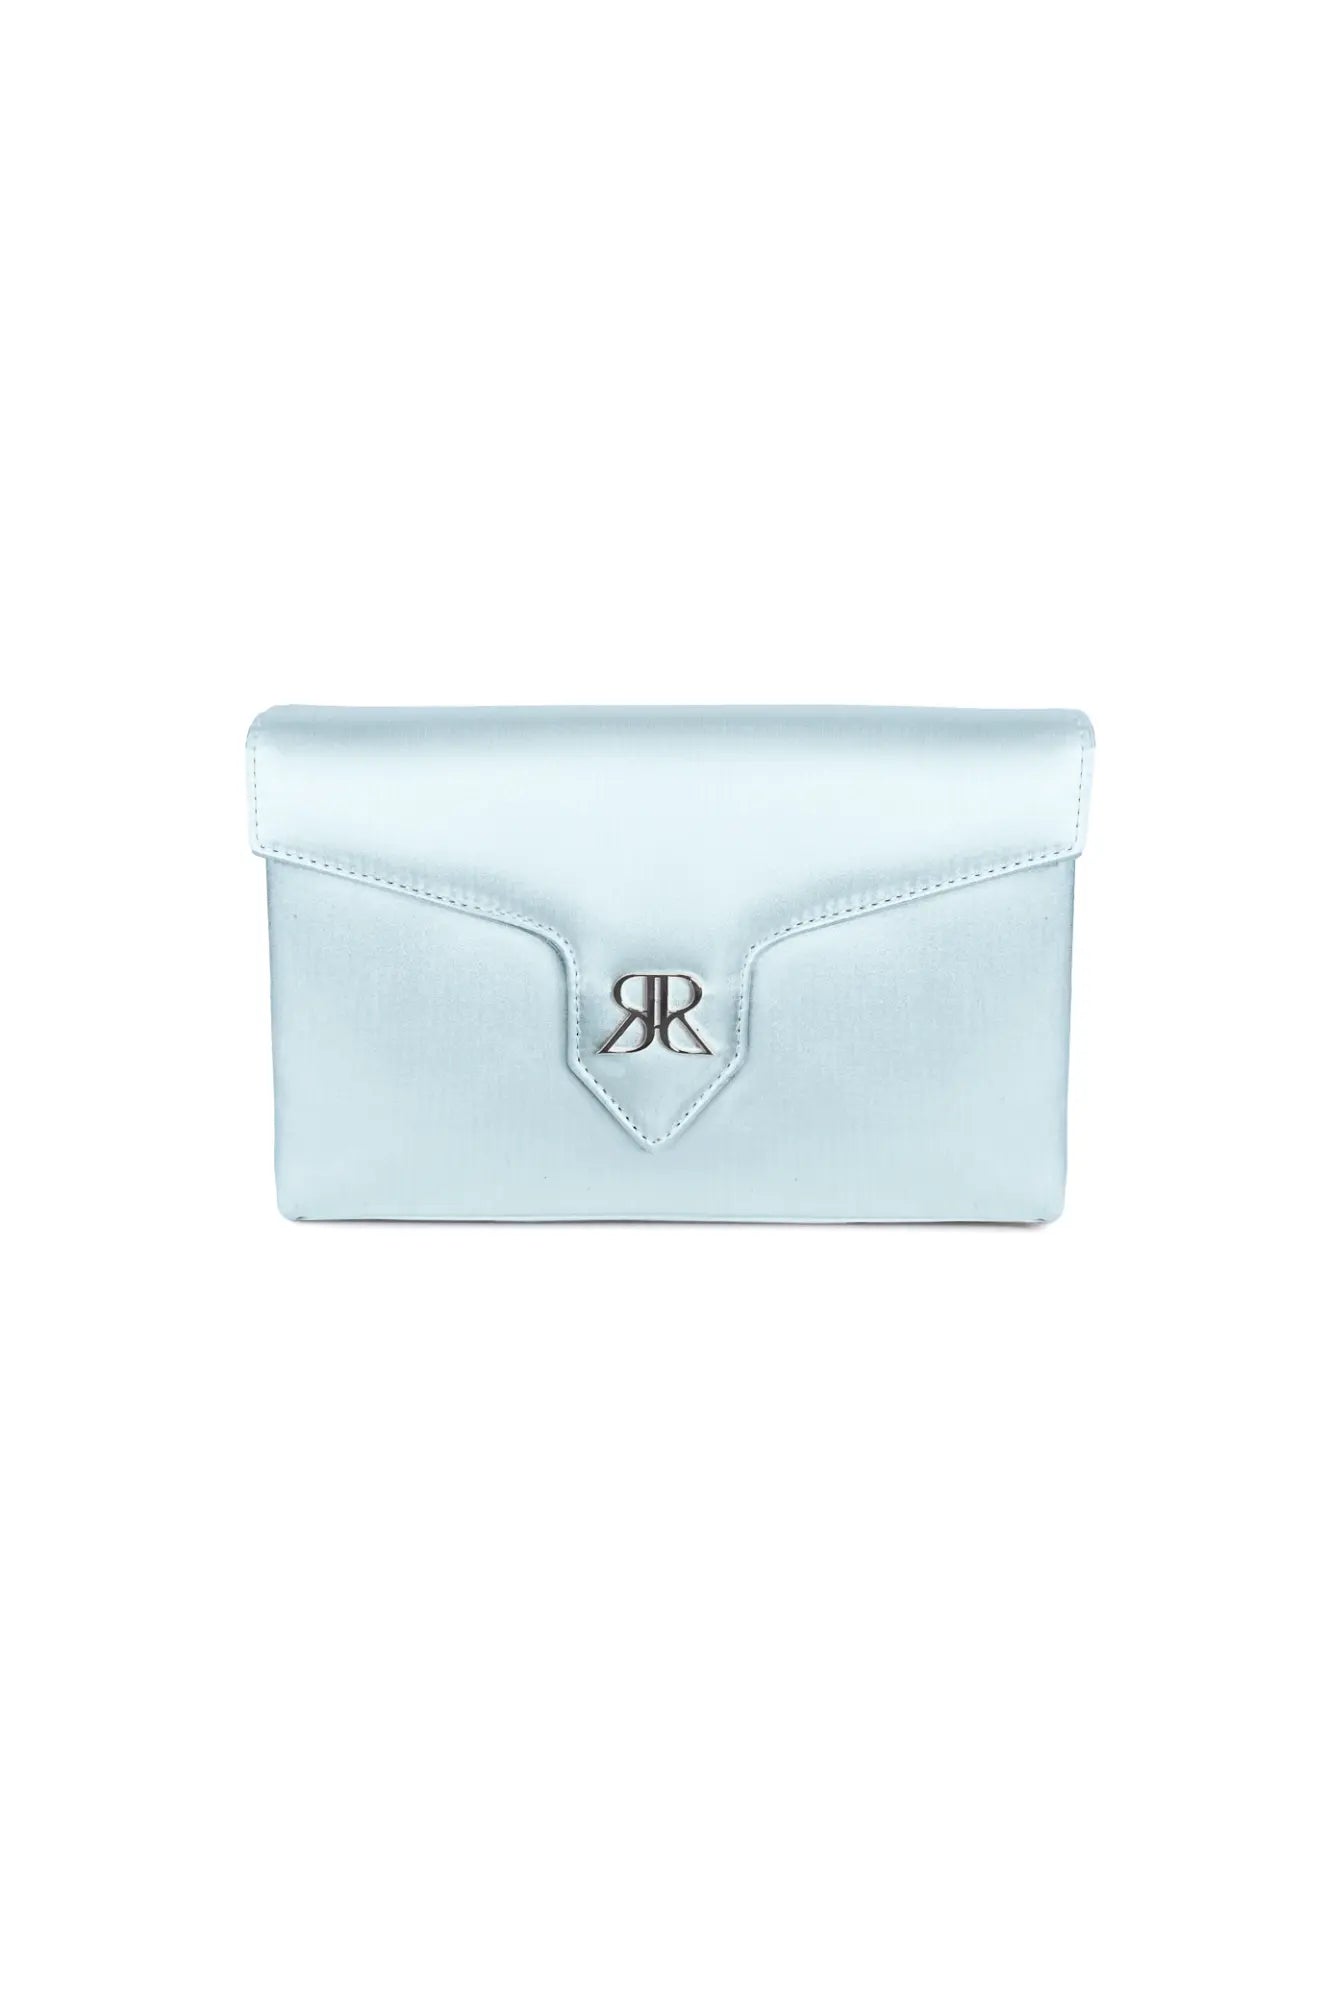 Love Note Envelope Clutch Cinderella Blue from The Bella Rosa Collection, perfect for elegant evenings.